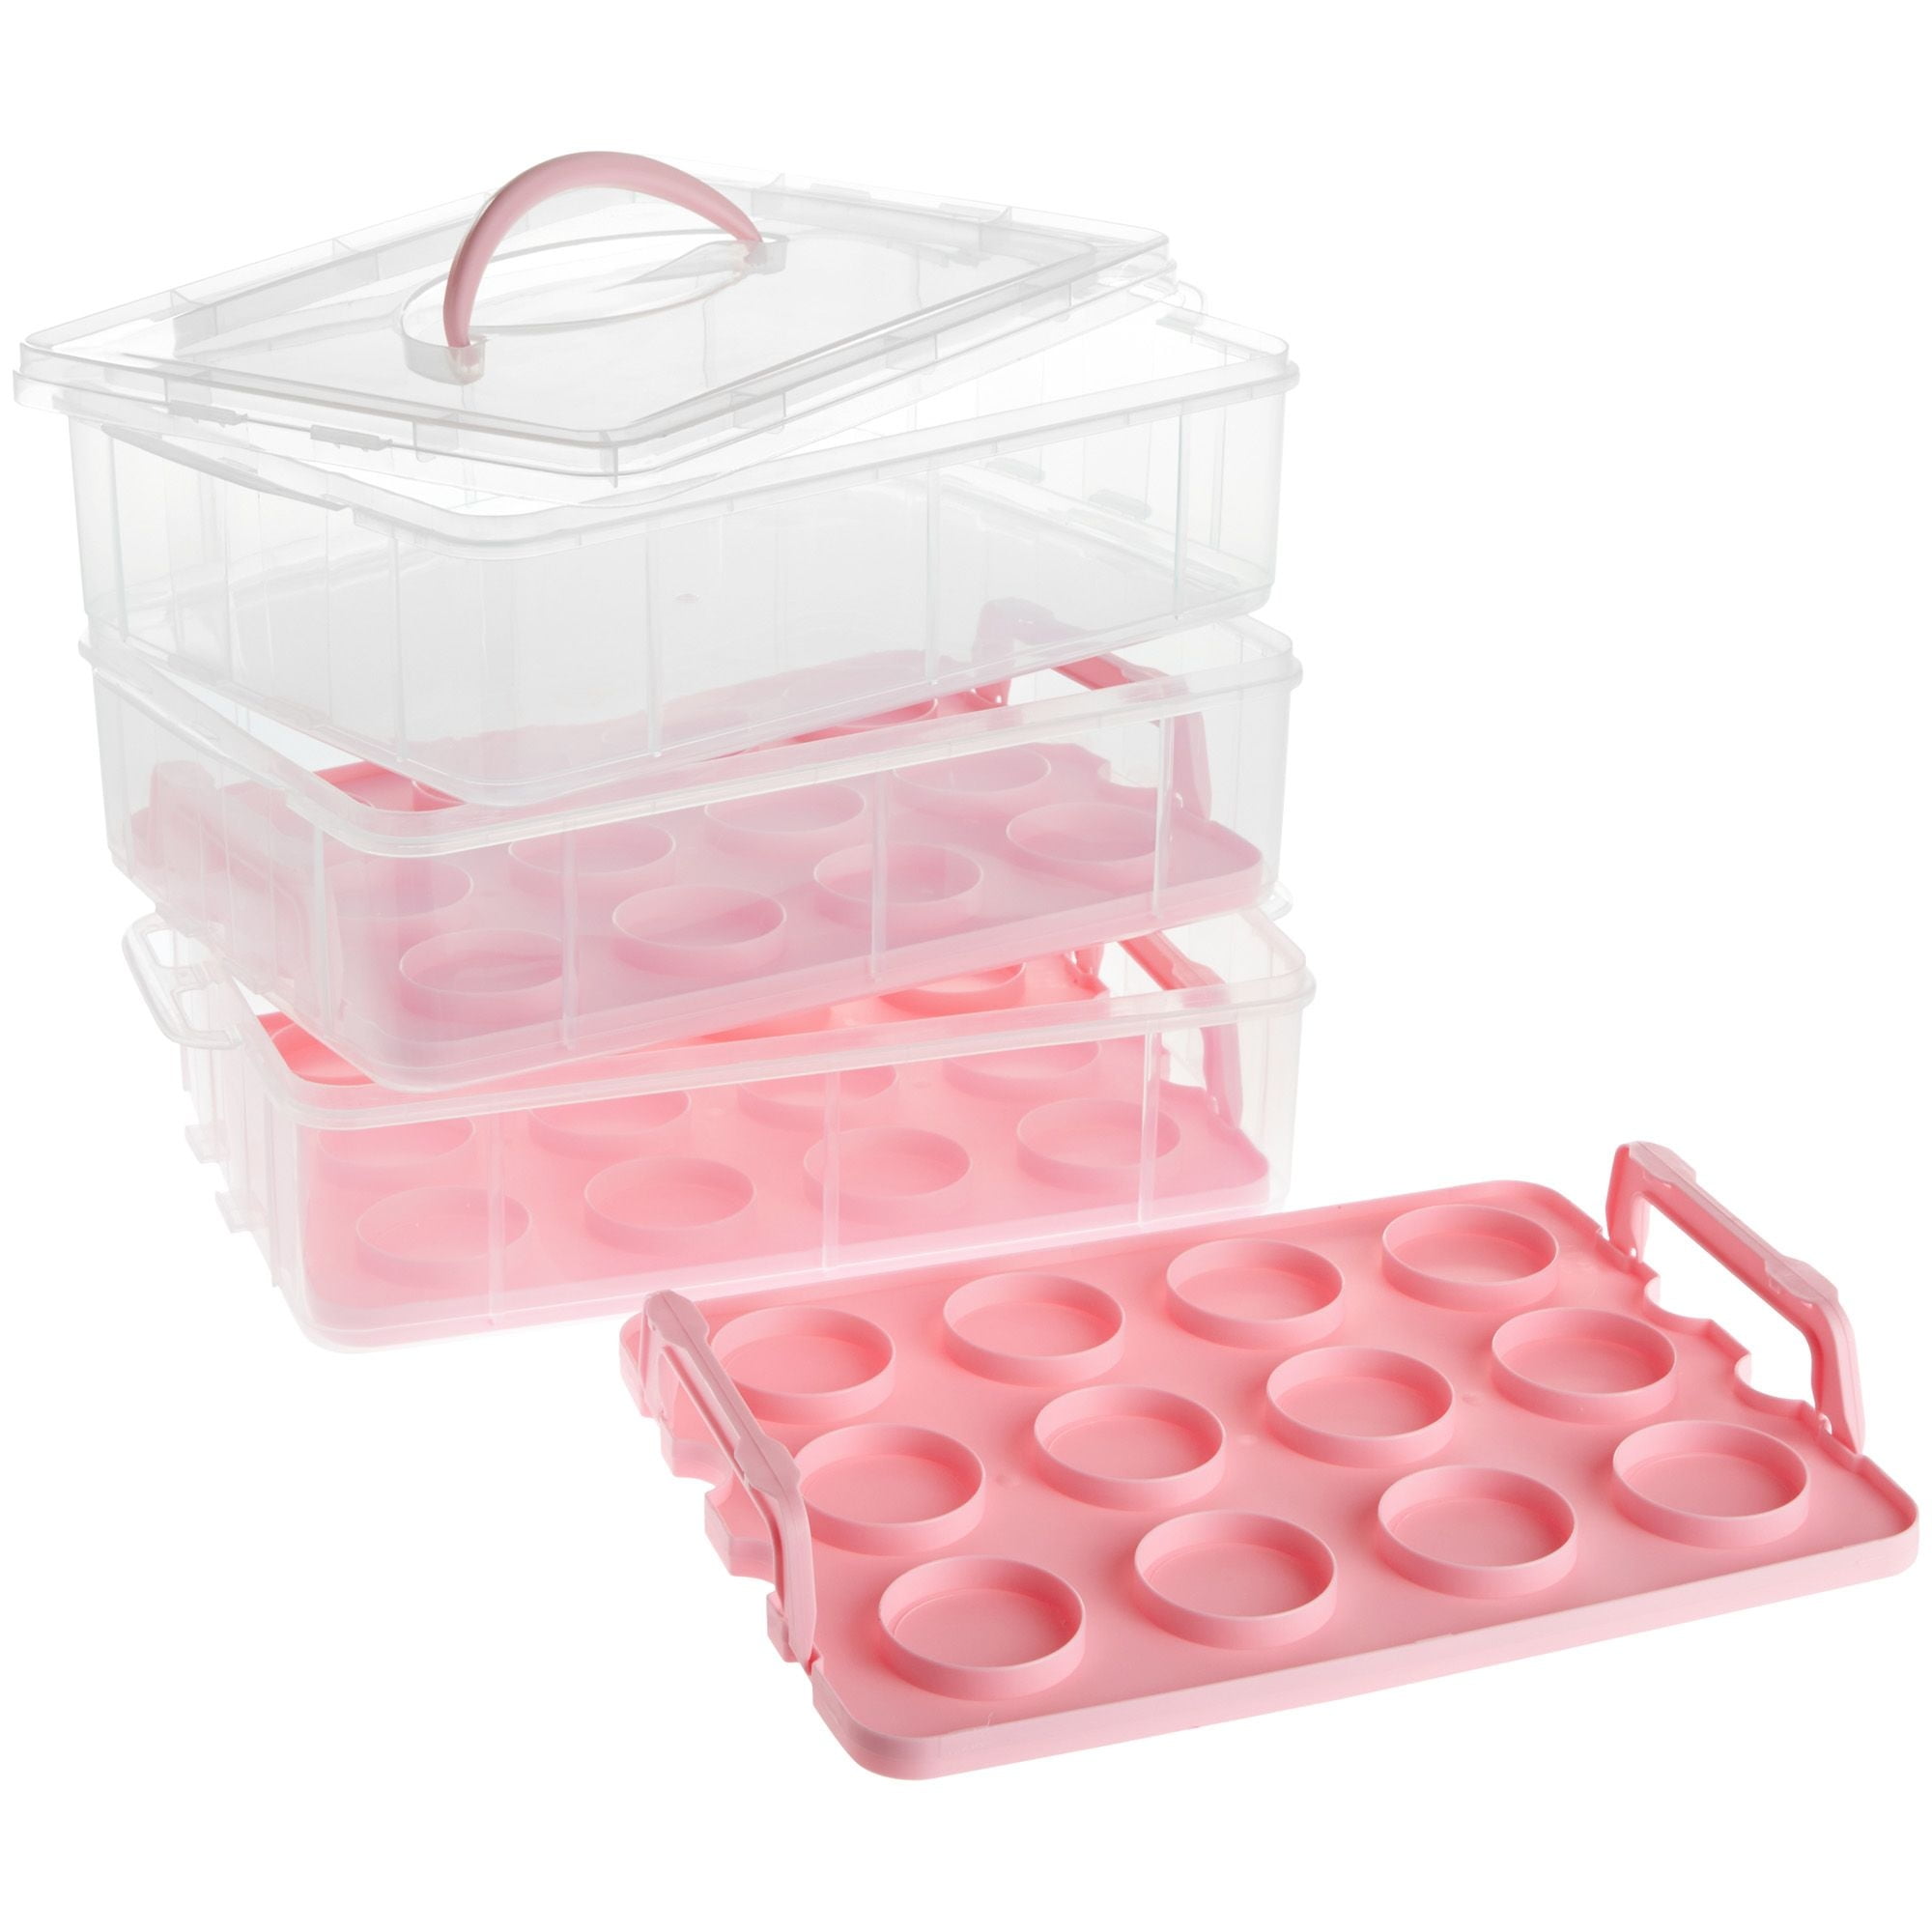  Flexzion 36 Cupcake Carrier 3 Tier Stackable Storage Container  Collapsible Cake Carrier with Lid and Handle, Reusable Rectangular Plastic  Dessert Travel Container, Display Holder Transport Box (Clear) : Home &  Kitchen